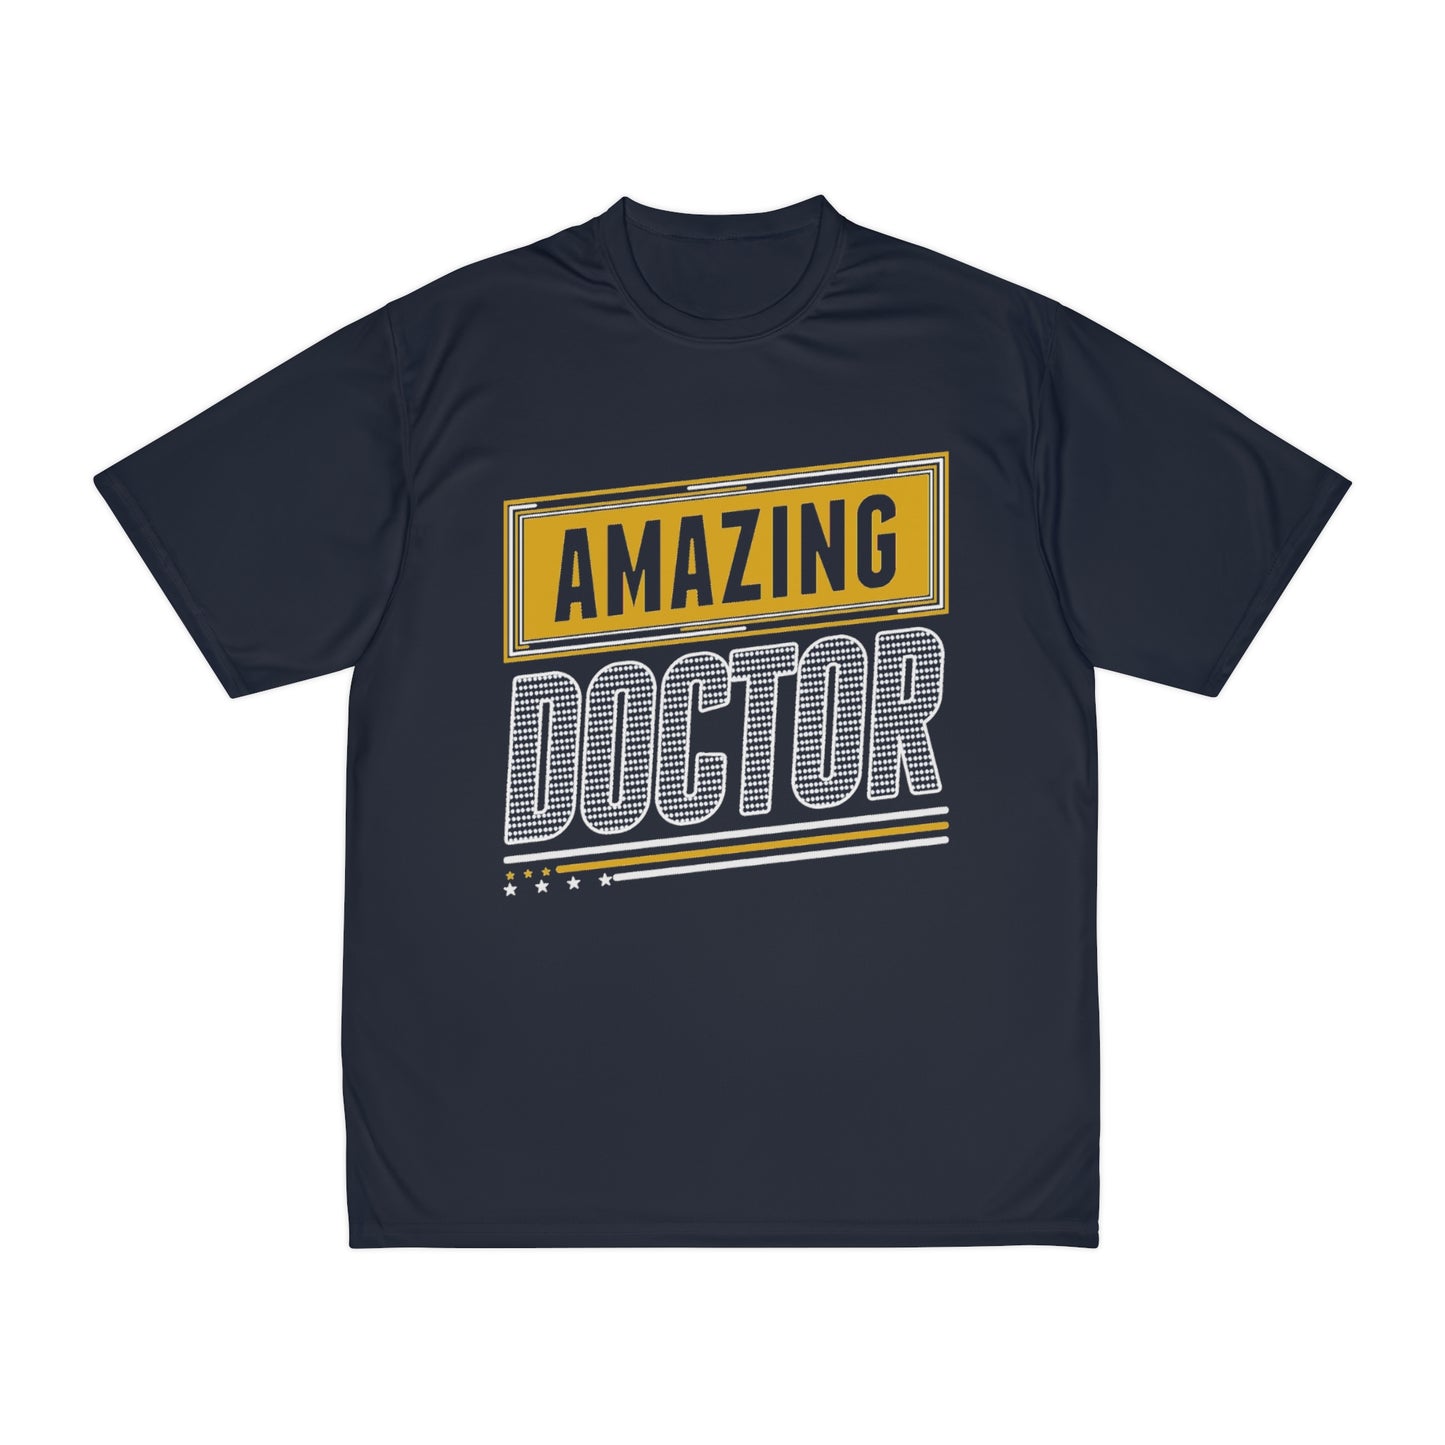 Amazing Doctor Performance T-Shirt, Doctor shirts, Doctor gift ideas, New Doctor shirt, Future doctor shirt, Doctors Gift, Doctor team shirt